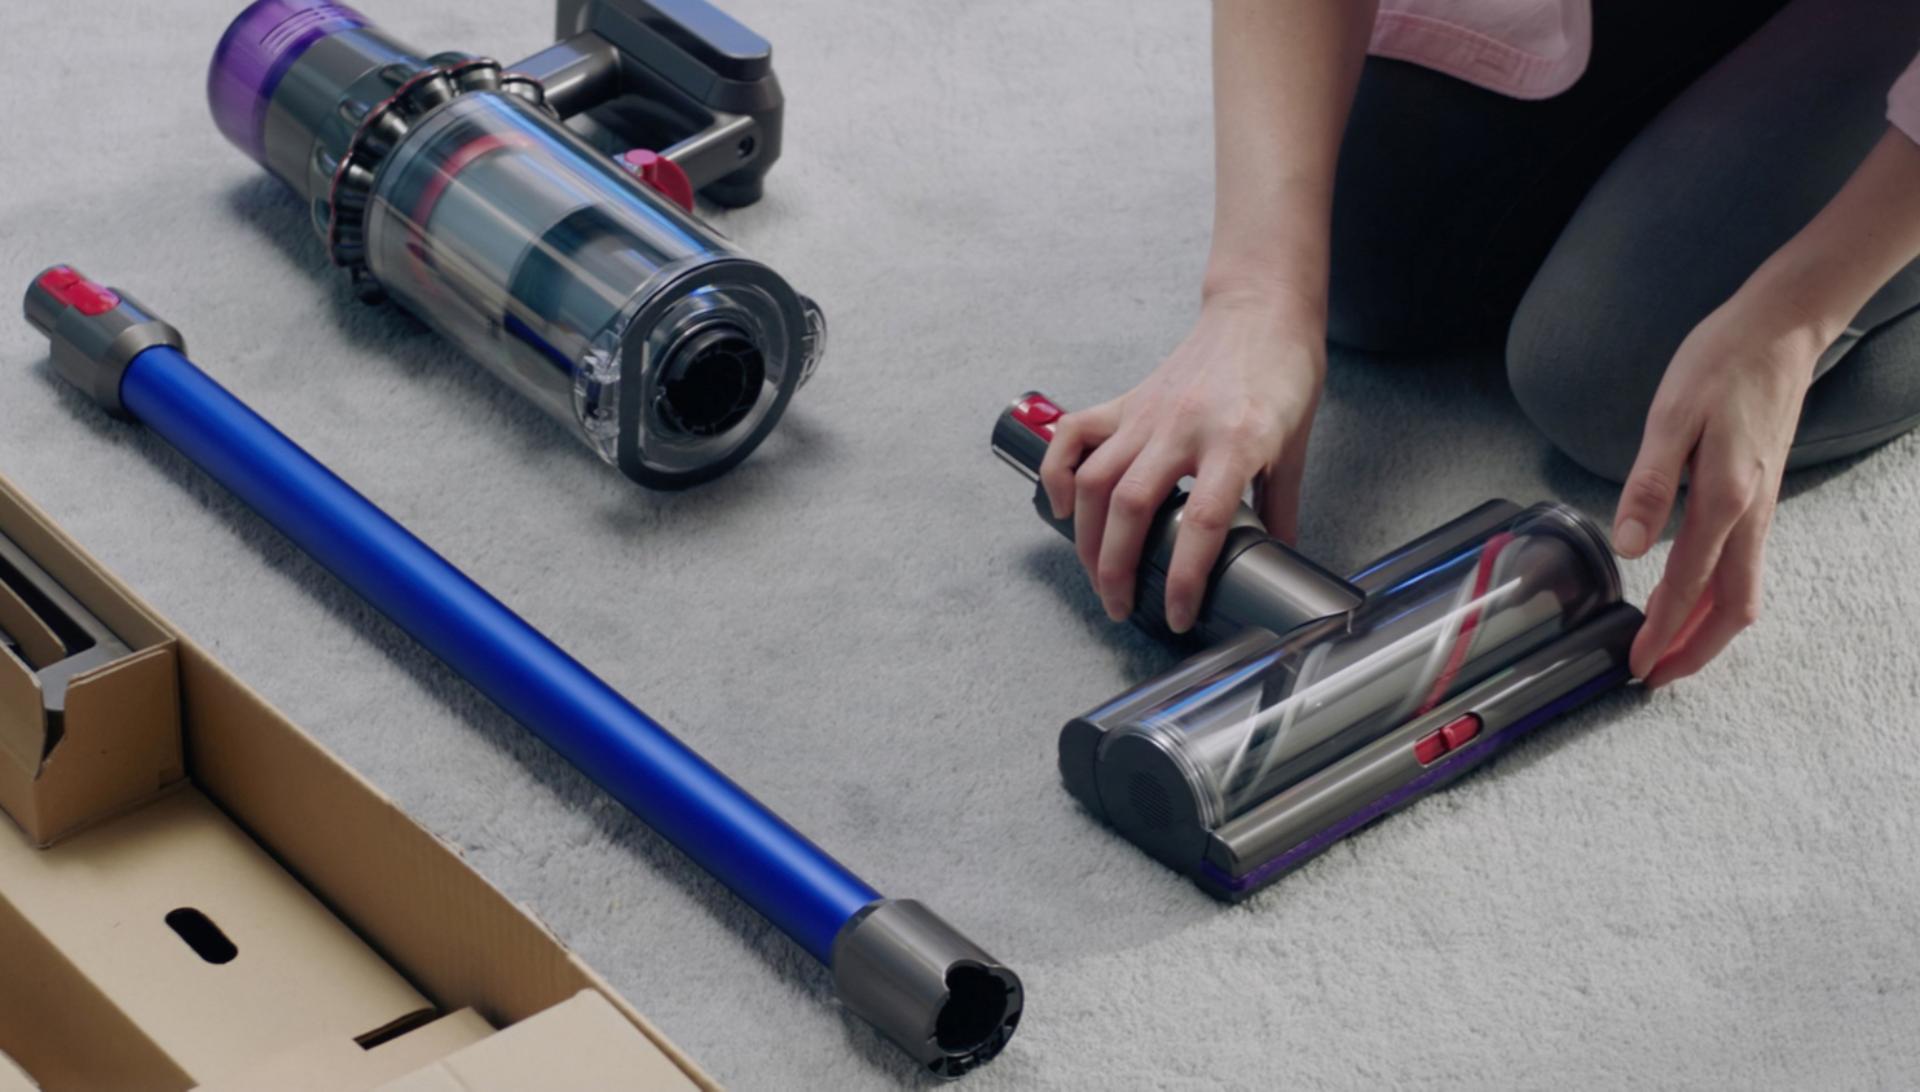 Dyson V11 getting started video